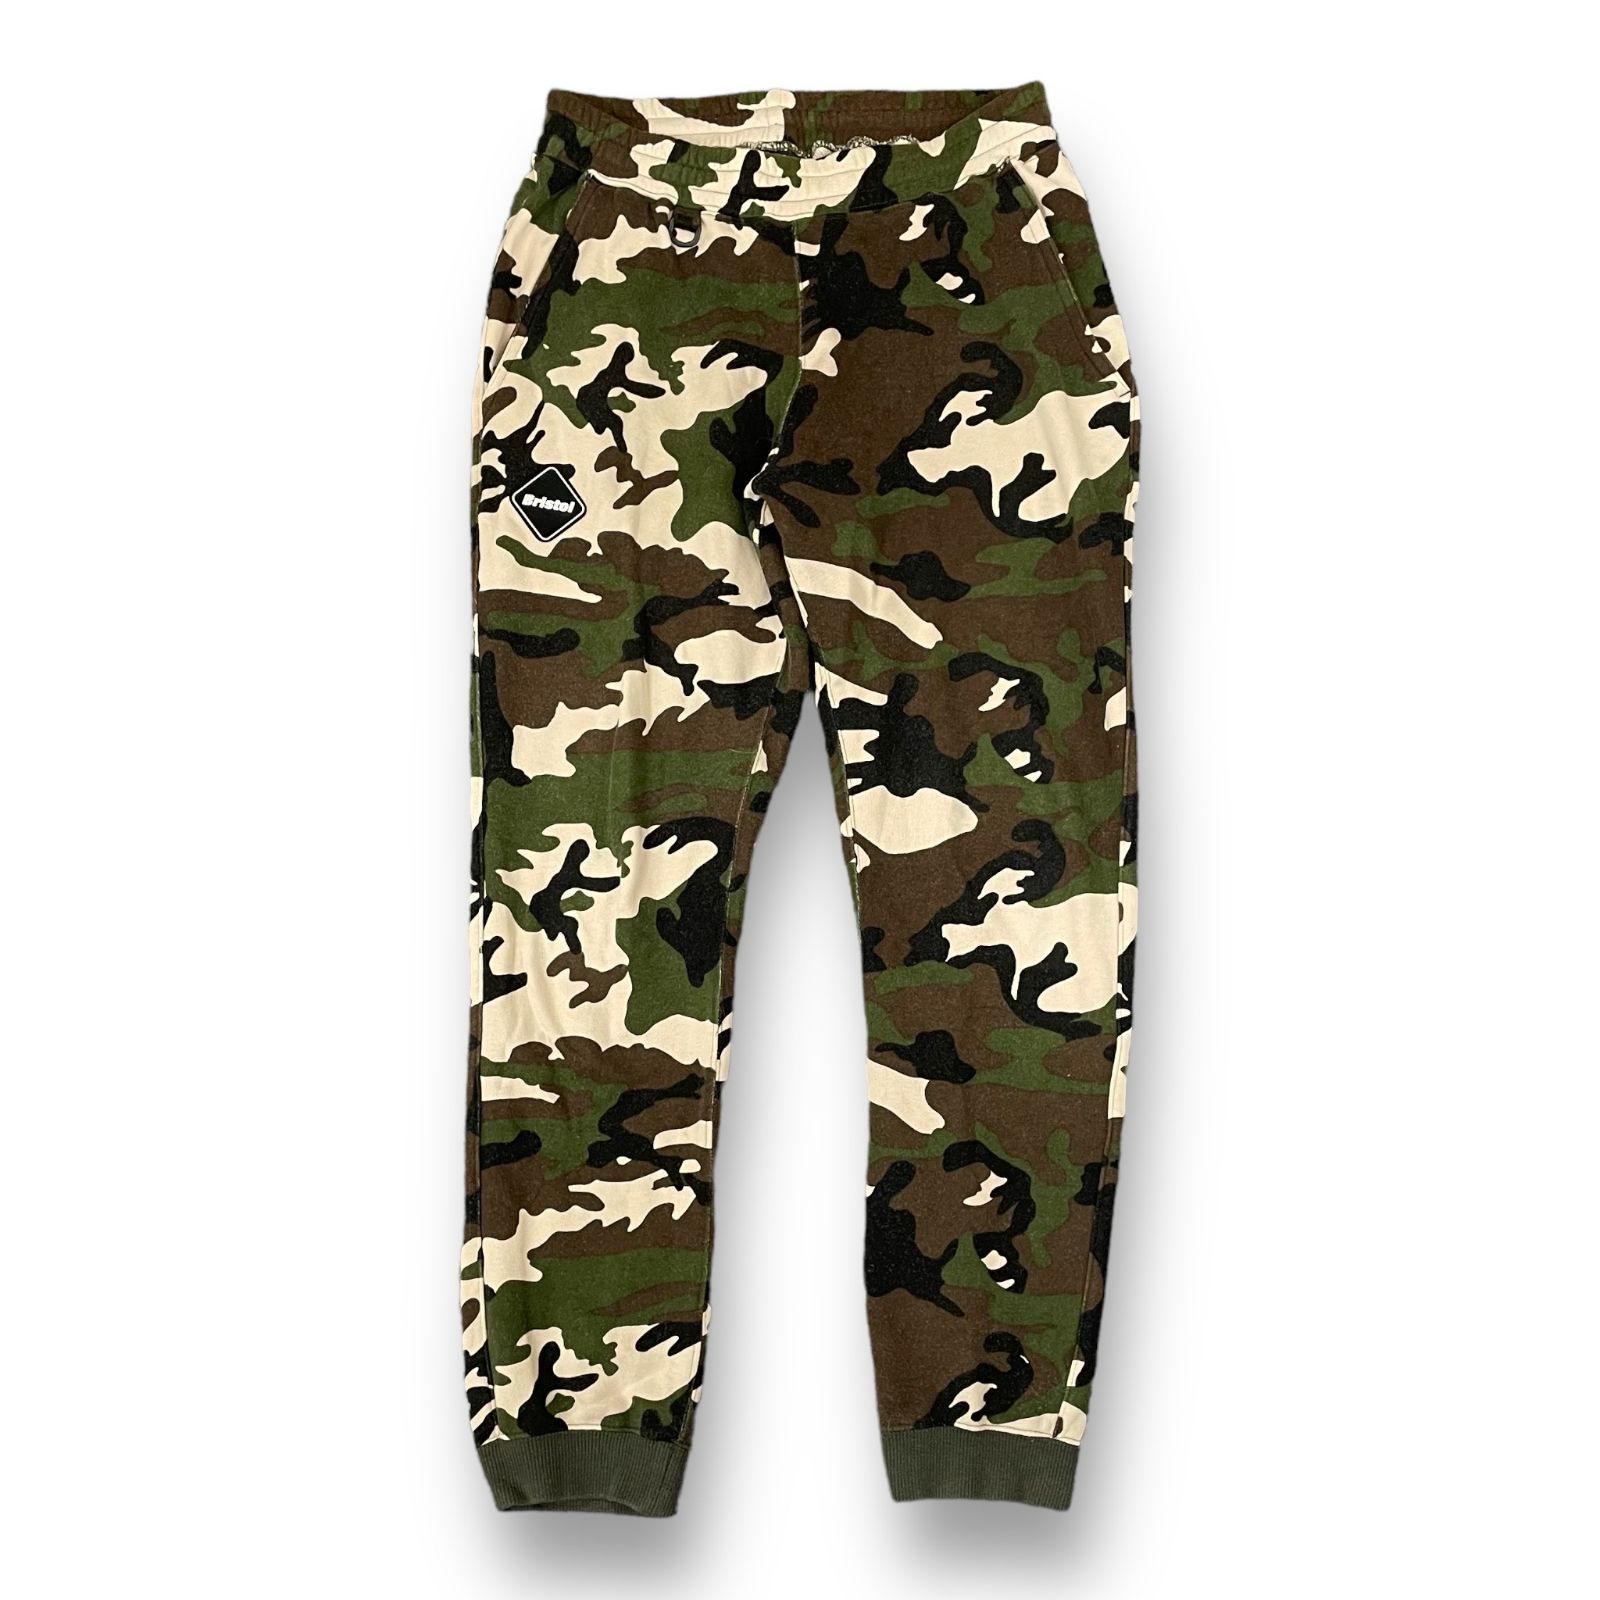 FCRB CAMOUFLAGE EMBLEM SWEAT PANTSその他 - その他